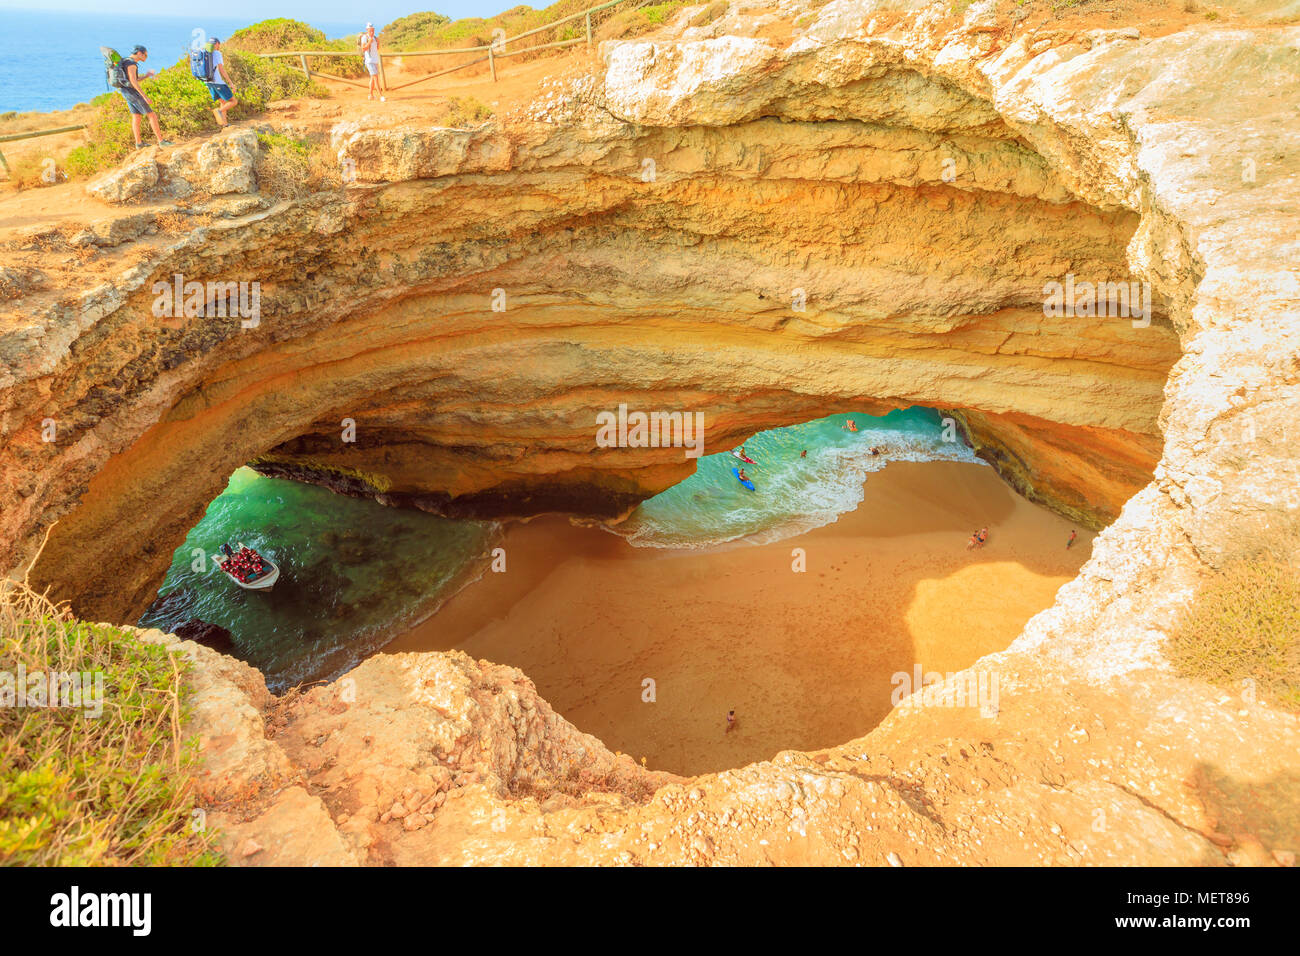 Benagil, Portugal - August 23, 2017: Benagil Cave seen from the top of rocky cliff in Algarve coast. Aerial view of famous sea caves with boat trips leading to visit the caves from Praia de Benagil. Stock Photo